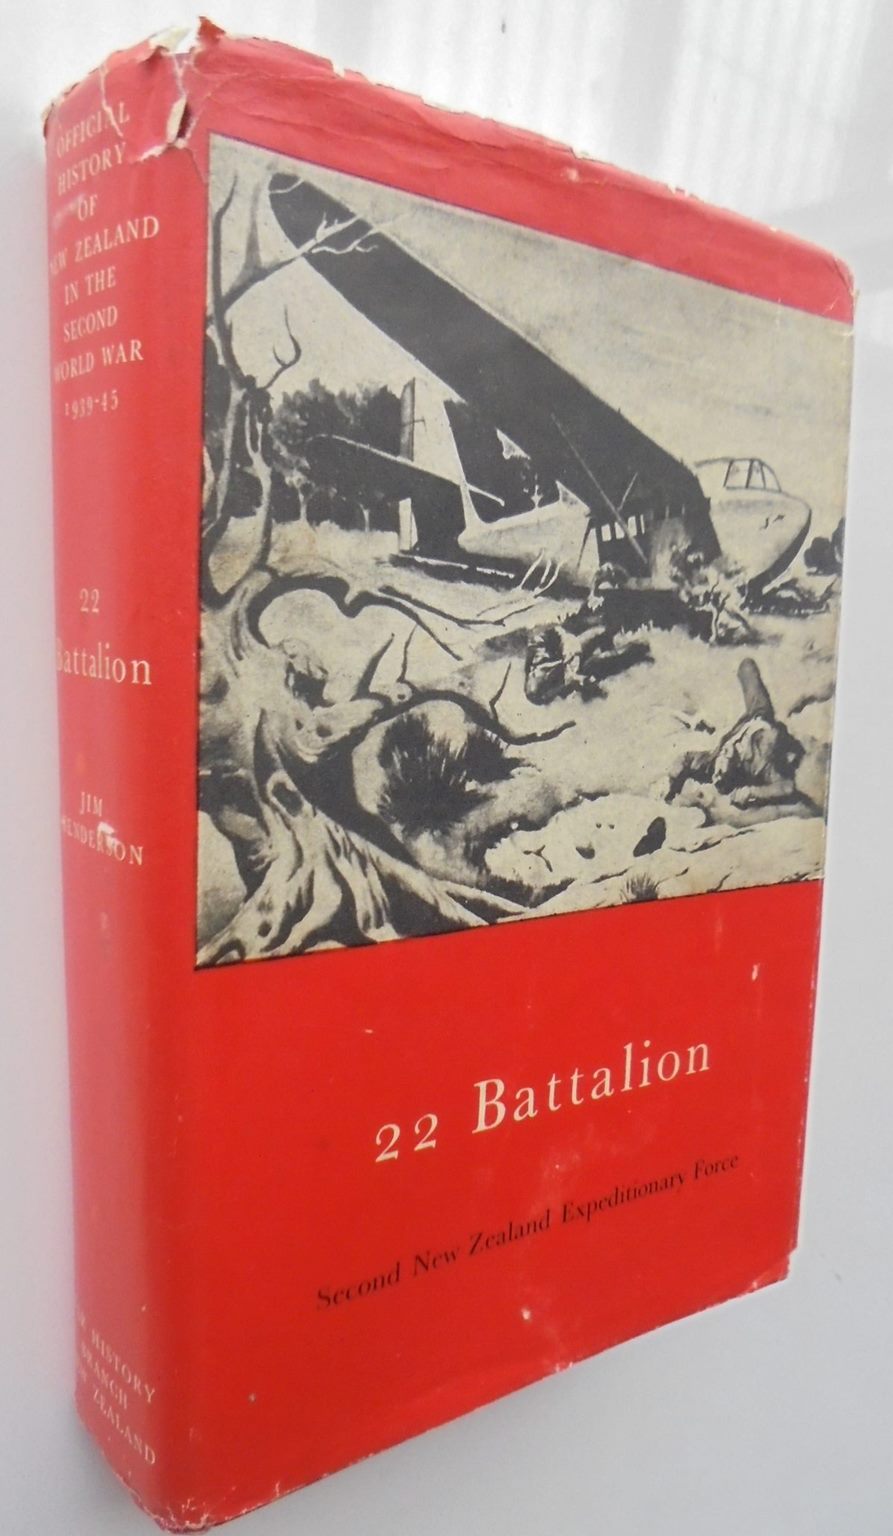 22 Battalion: Official History of New Zealand in the Second World War 1939-45